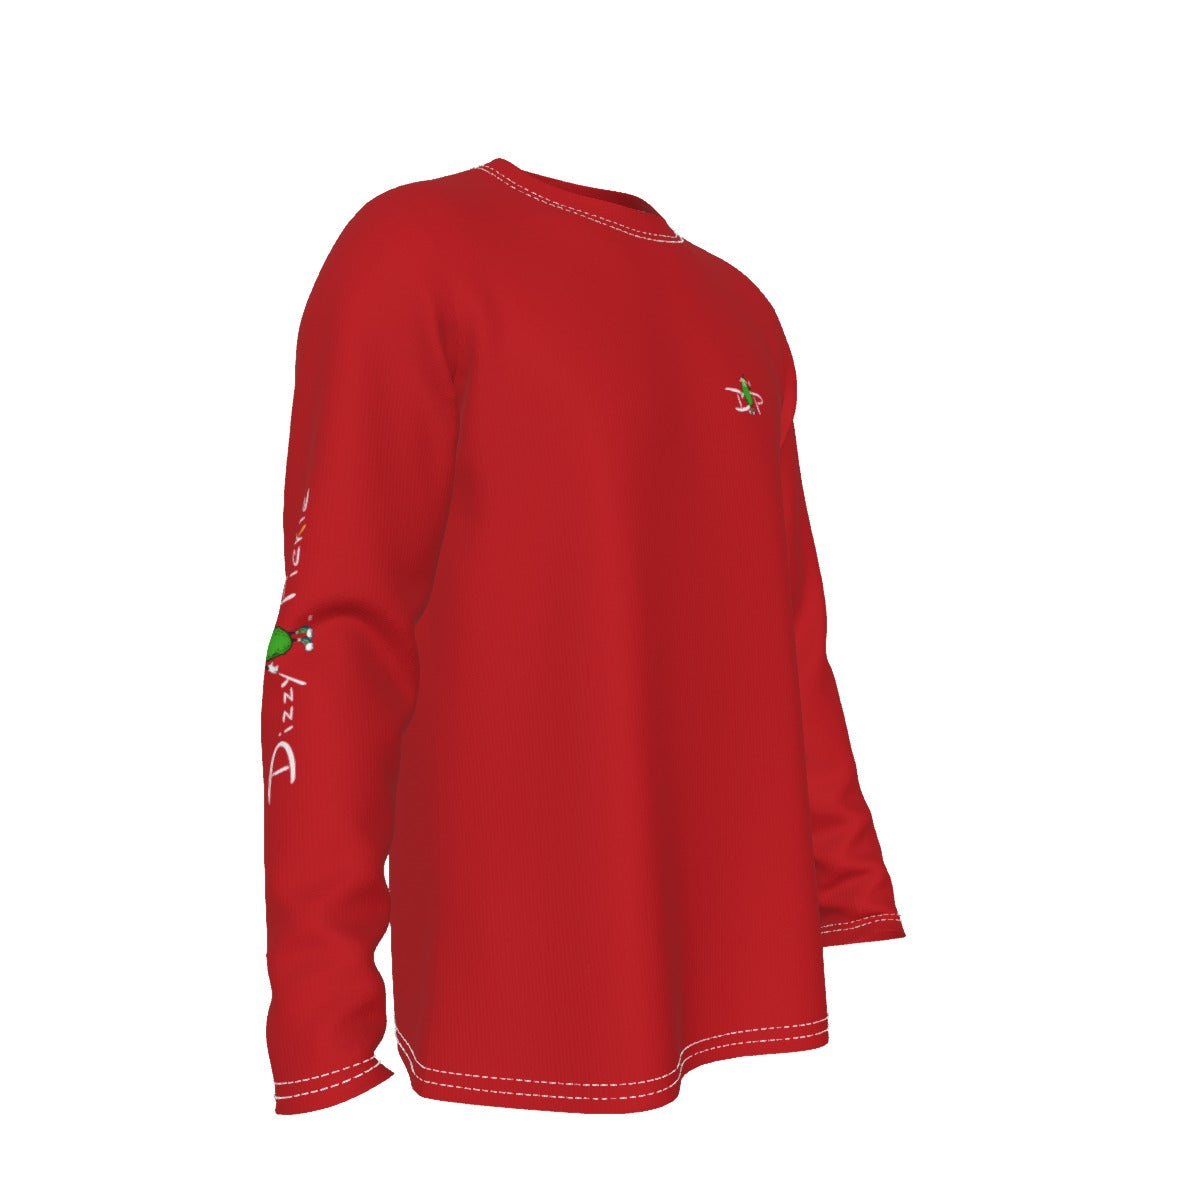 PICKLEBALL - Red - Men's Long Sleeve T-Shirt by Dizzy Pickle